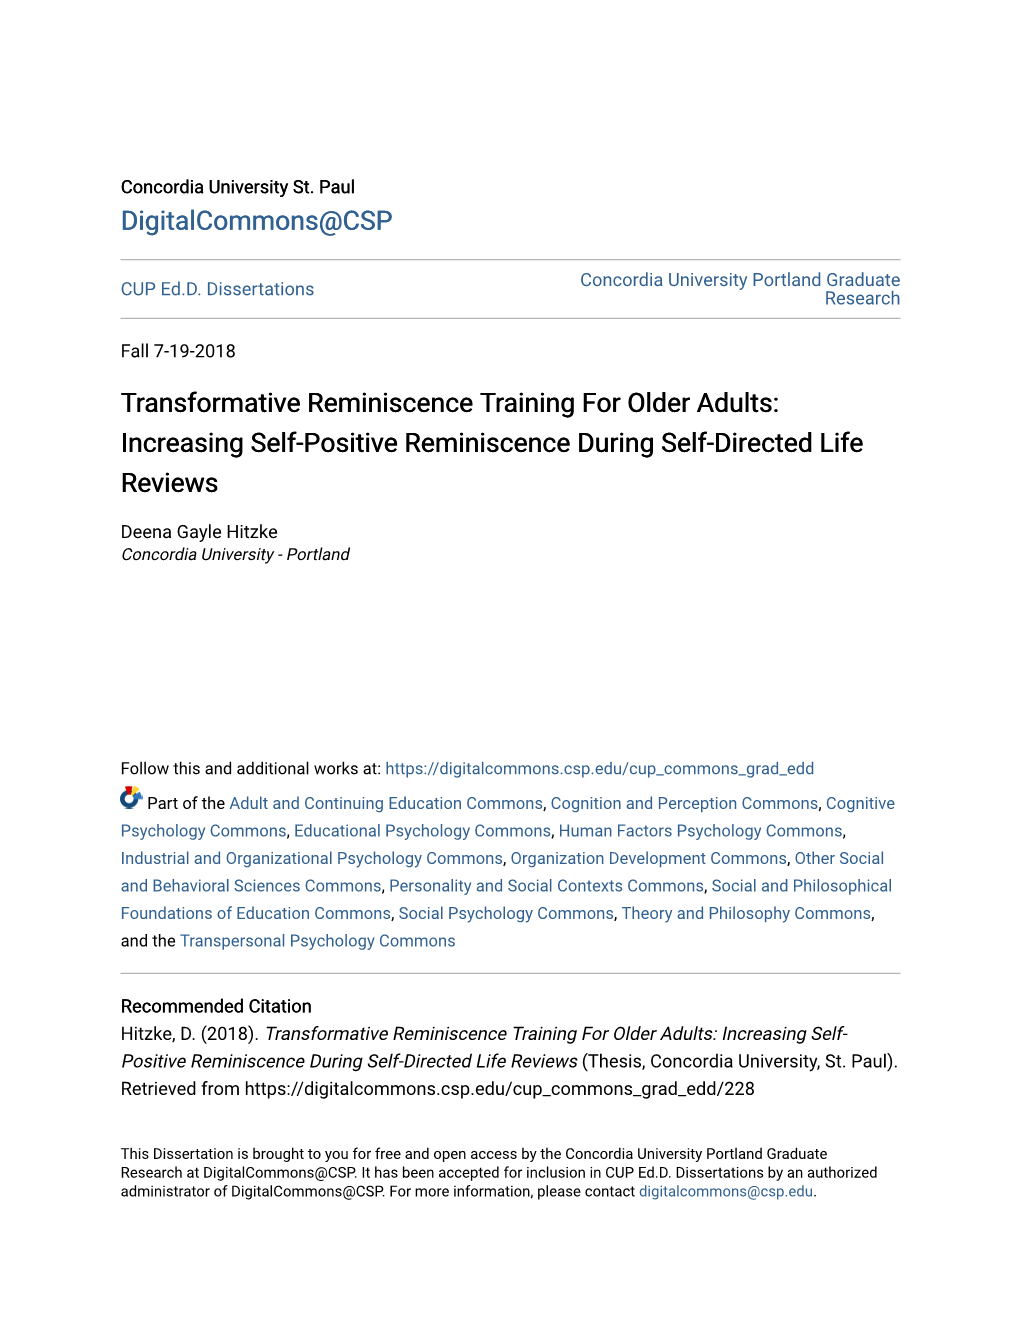 Transformative Reminiscence Training for Older Adults: Increasing Self-Positive Reminiscence During Self-Directed Life Reviews